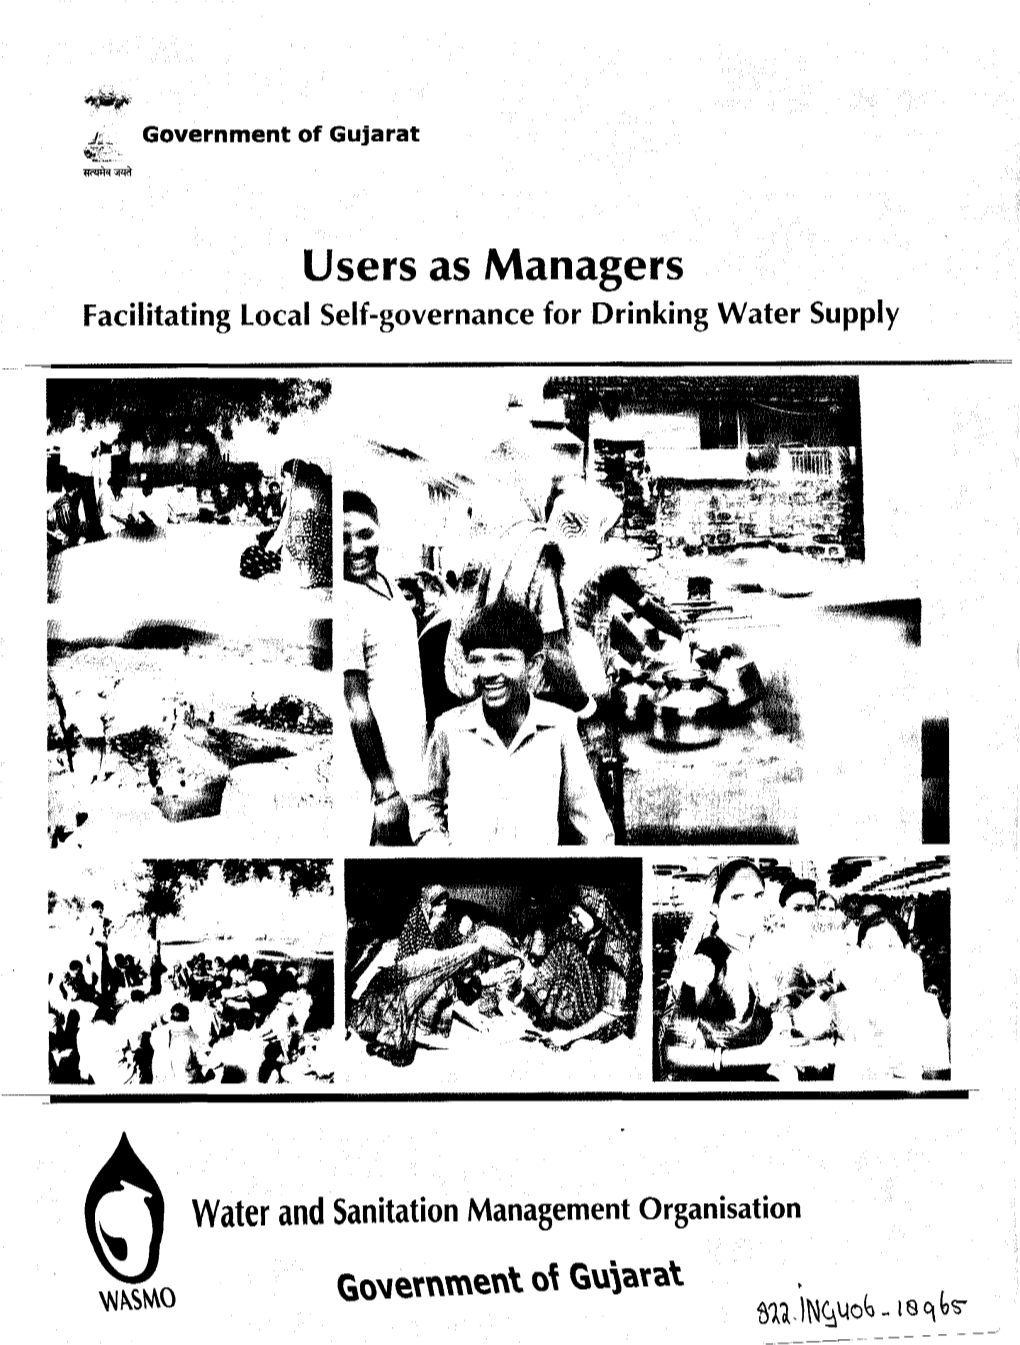 Users As Managers Facilitating Local Self-Governance for Drinking Water Supply